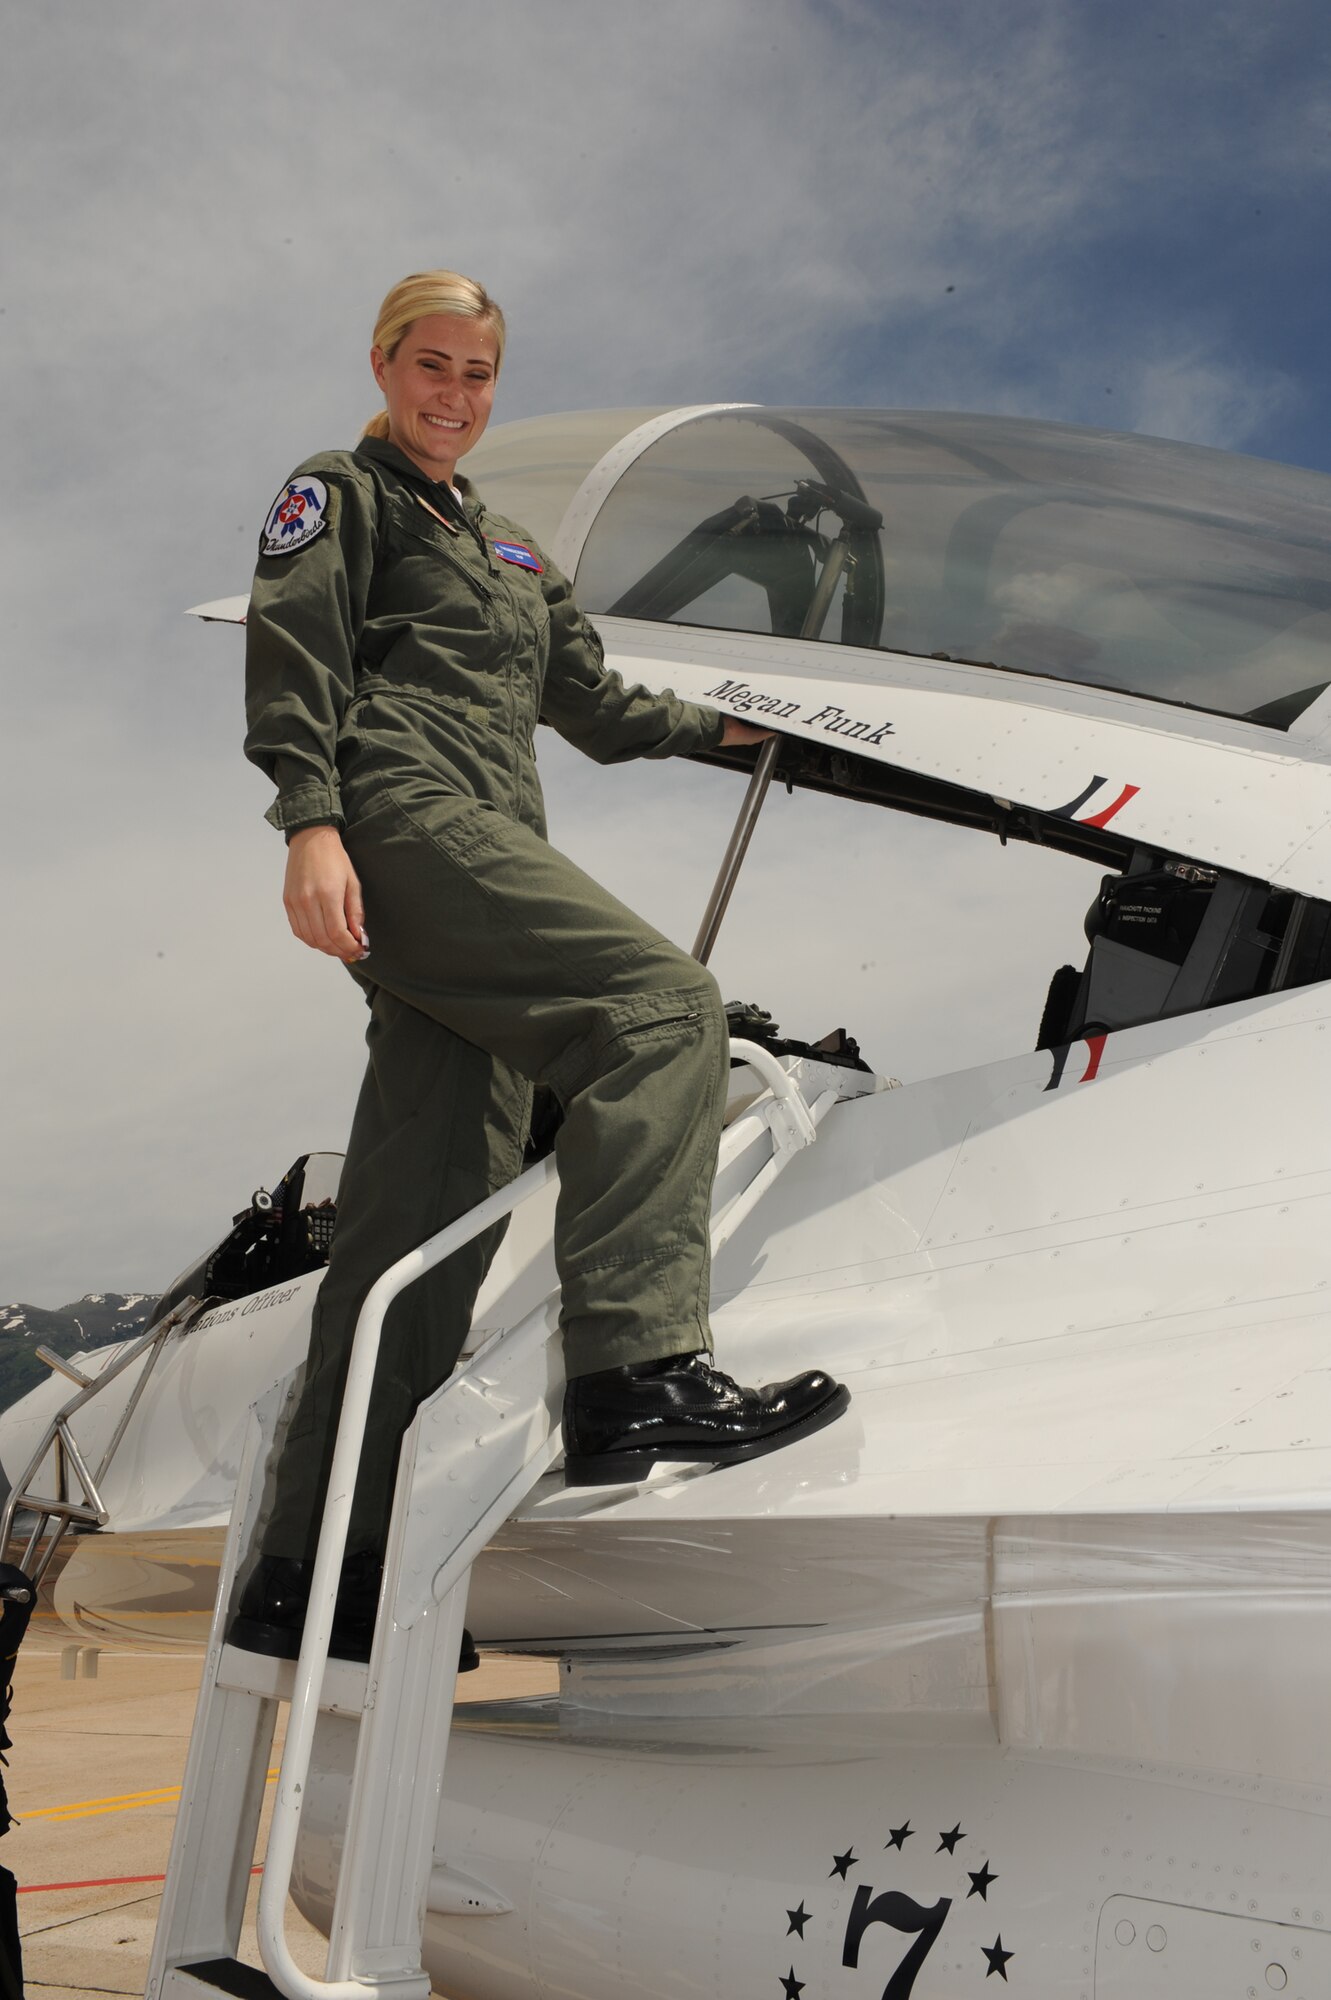 Megan Funk poses before her Hometown hero flight in a Thunderbird F-16 Fighting Falcon June 4 at Hill Air Force Base, Utah. (U.S Air Force photo by Tech. Sgt. Russ Martin)